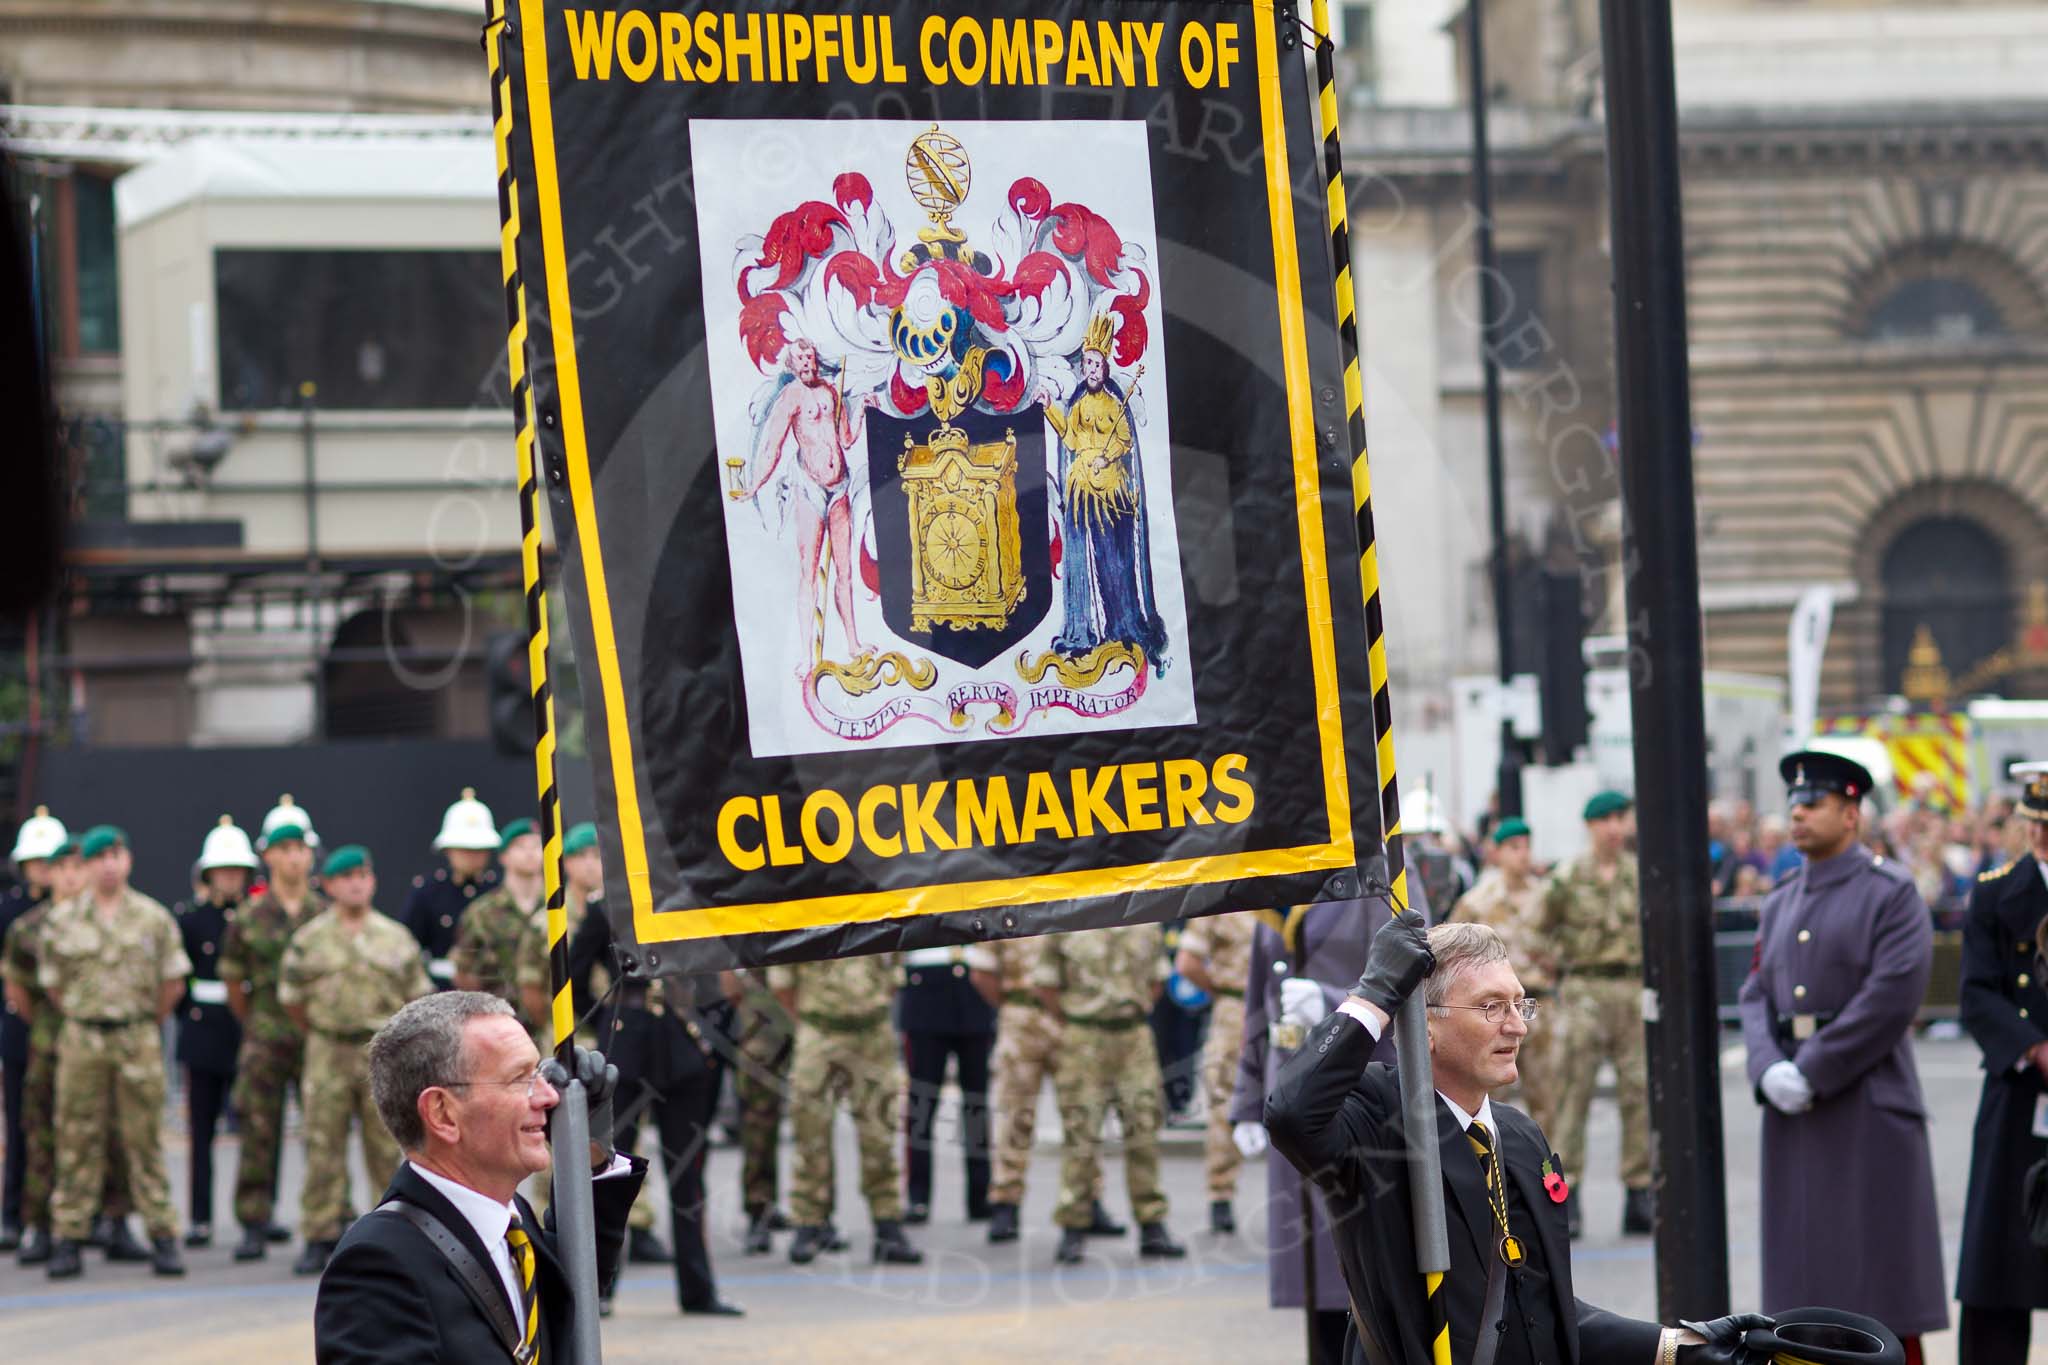 The Lord Mayor's Show 2011: Worshipful Company of Clockmakers (http://www.clockmakers.org/)..
Opposite Mansion House, City of London,
London,
-,
United Kingdom,
on 12 November 2011 at 11:10, image #147